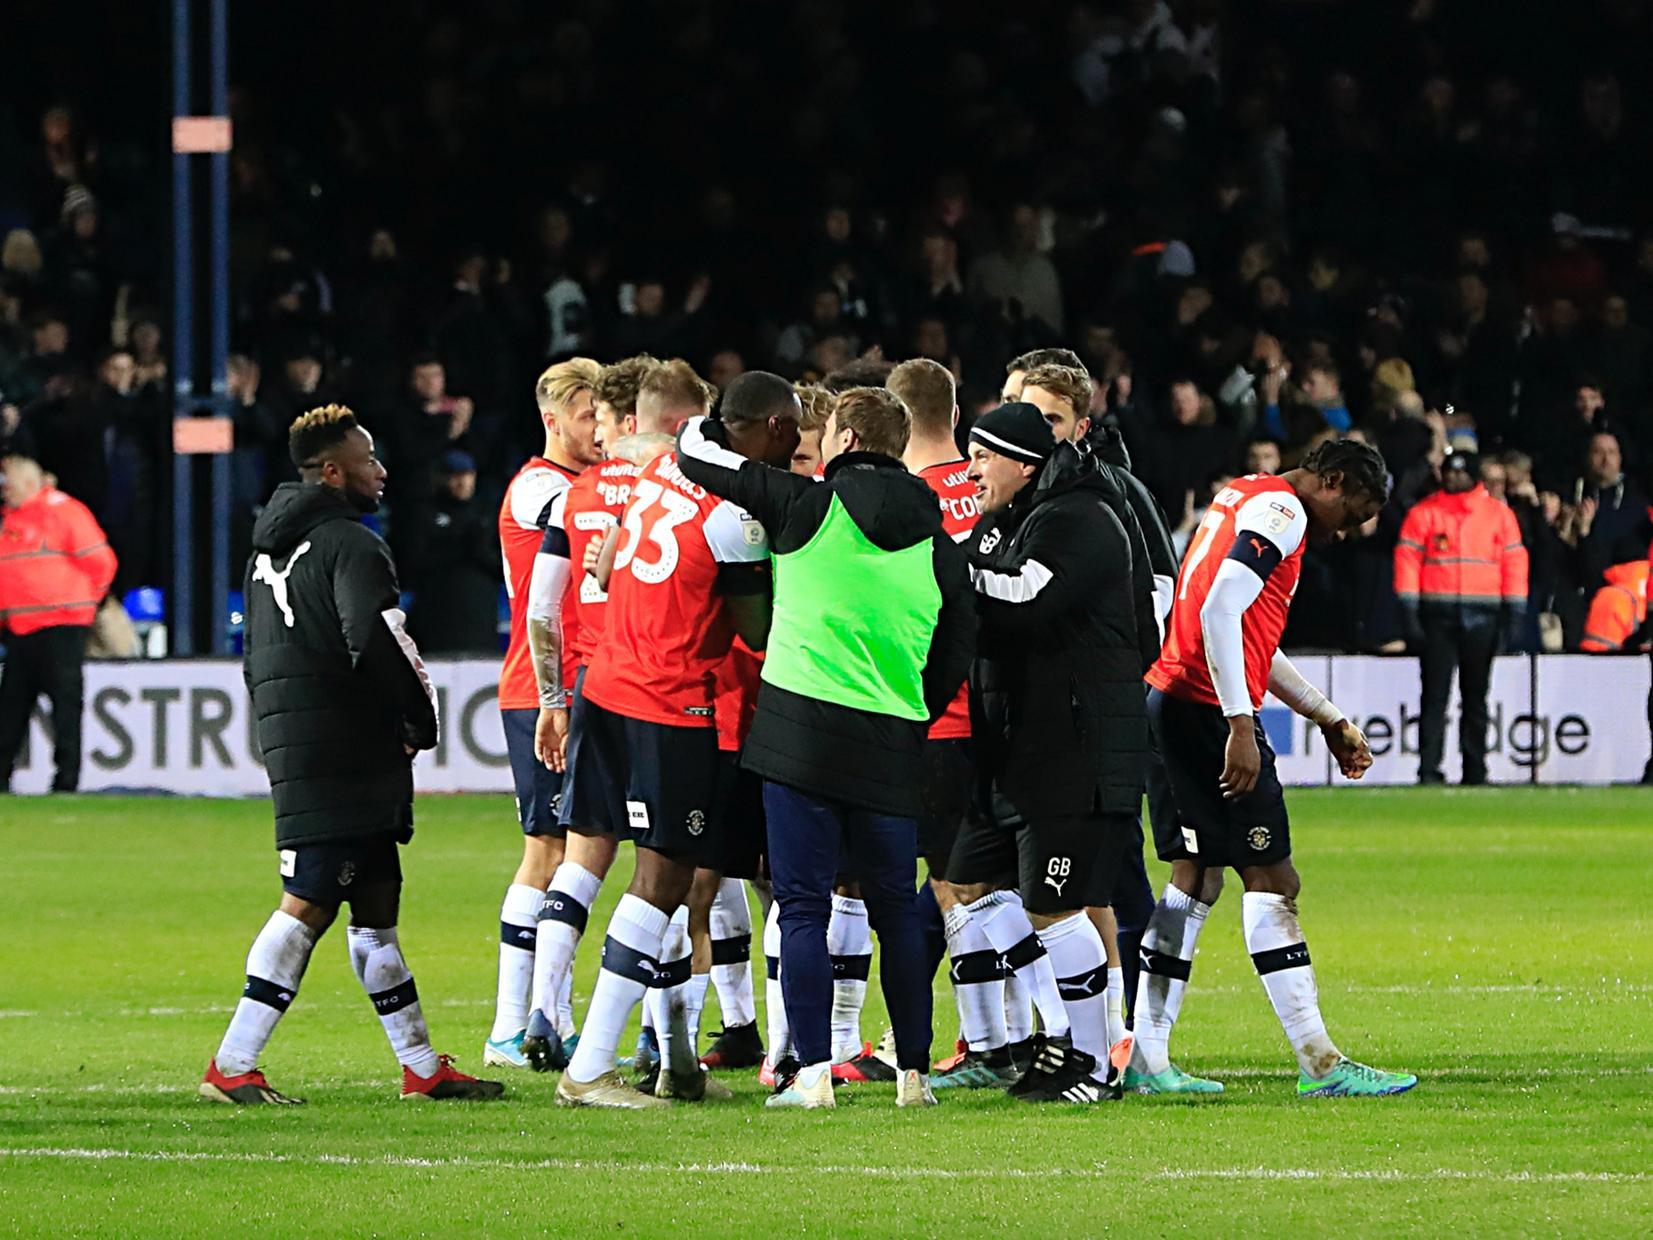 The Hatters celebrate beating Derby County 3-2 at Kenilworth Road last night